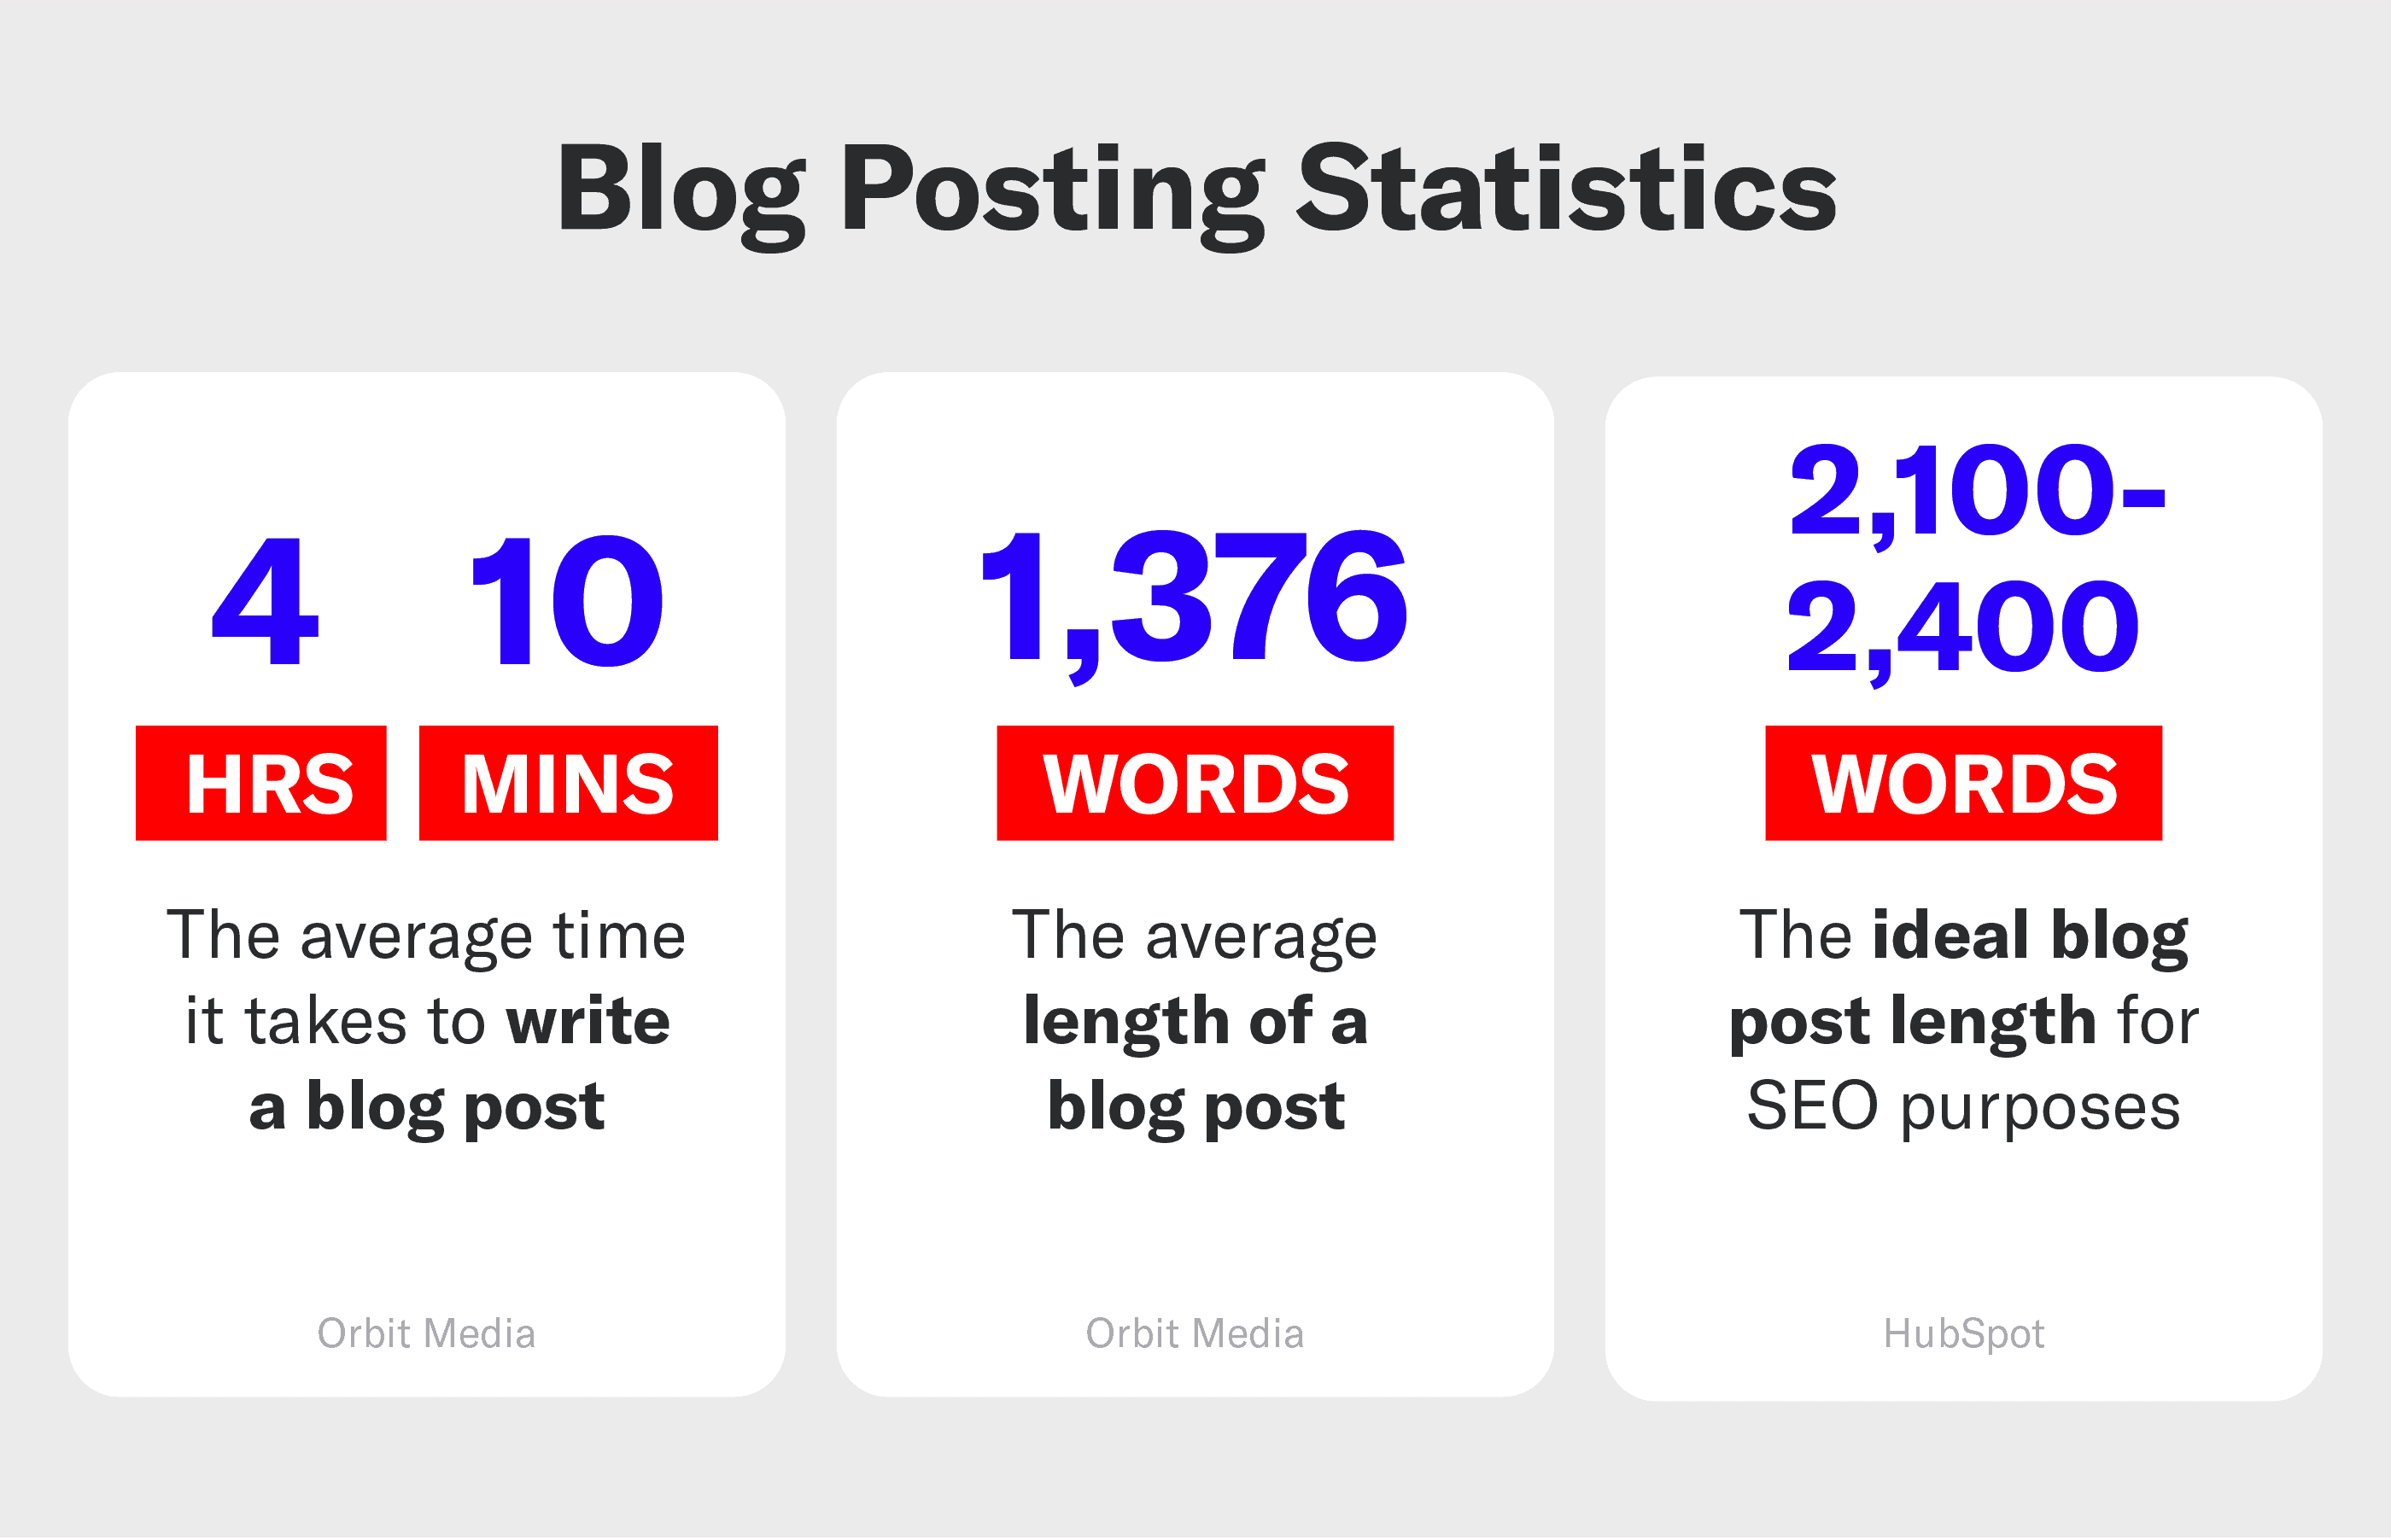 log posting statistics highlighted with icons